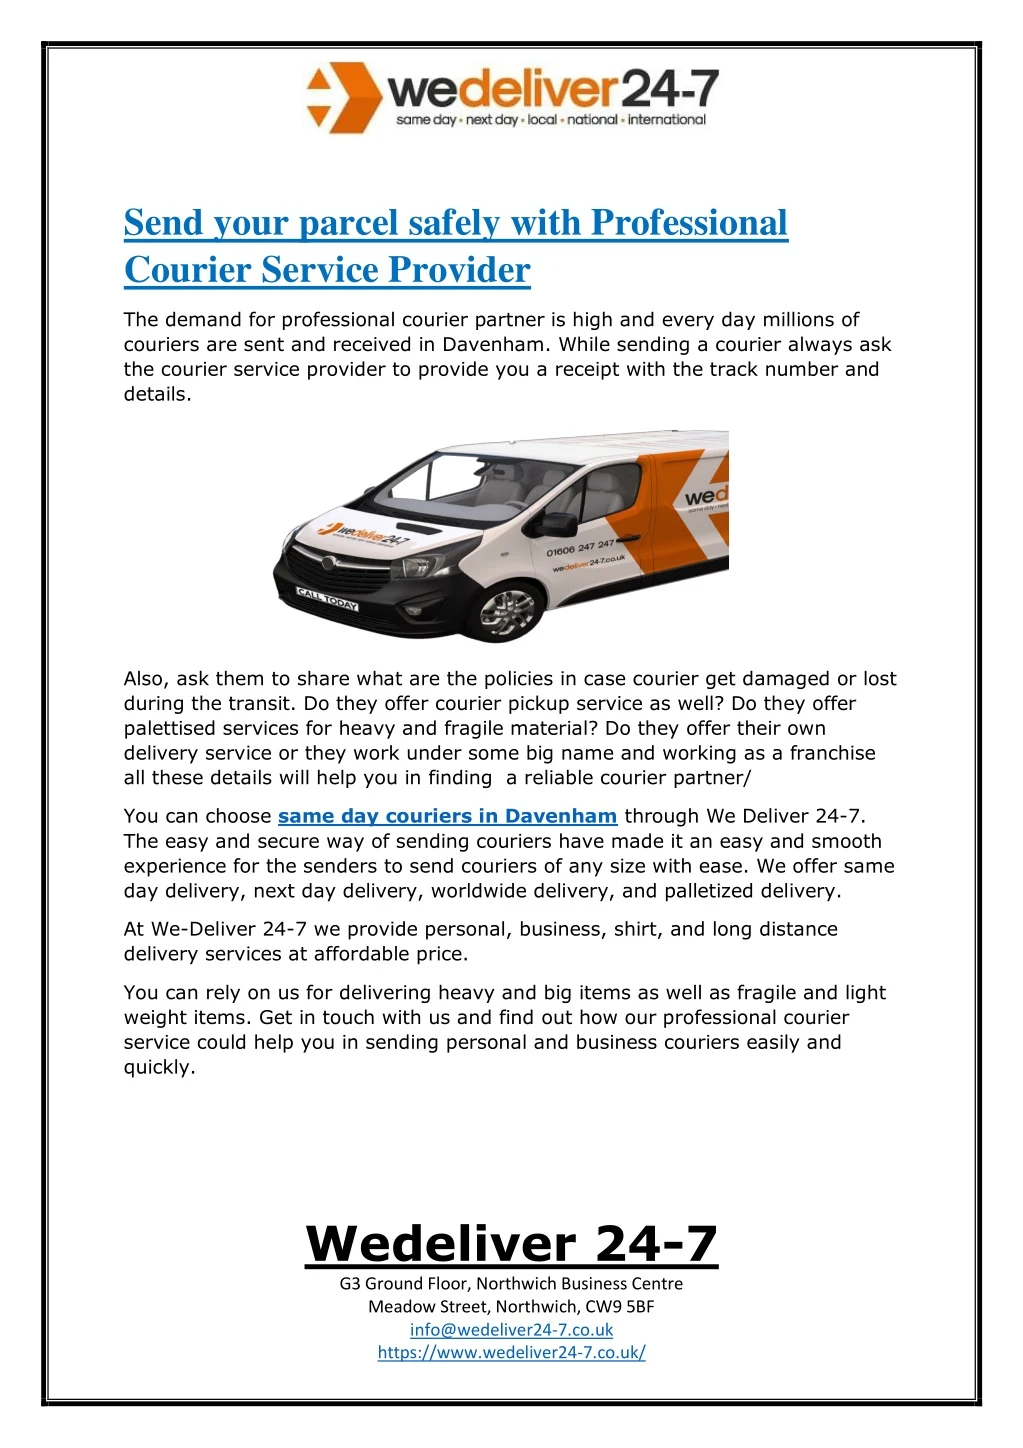 send your parcel safely with professional courier